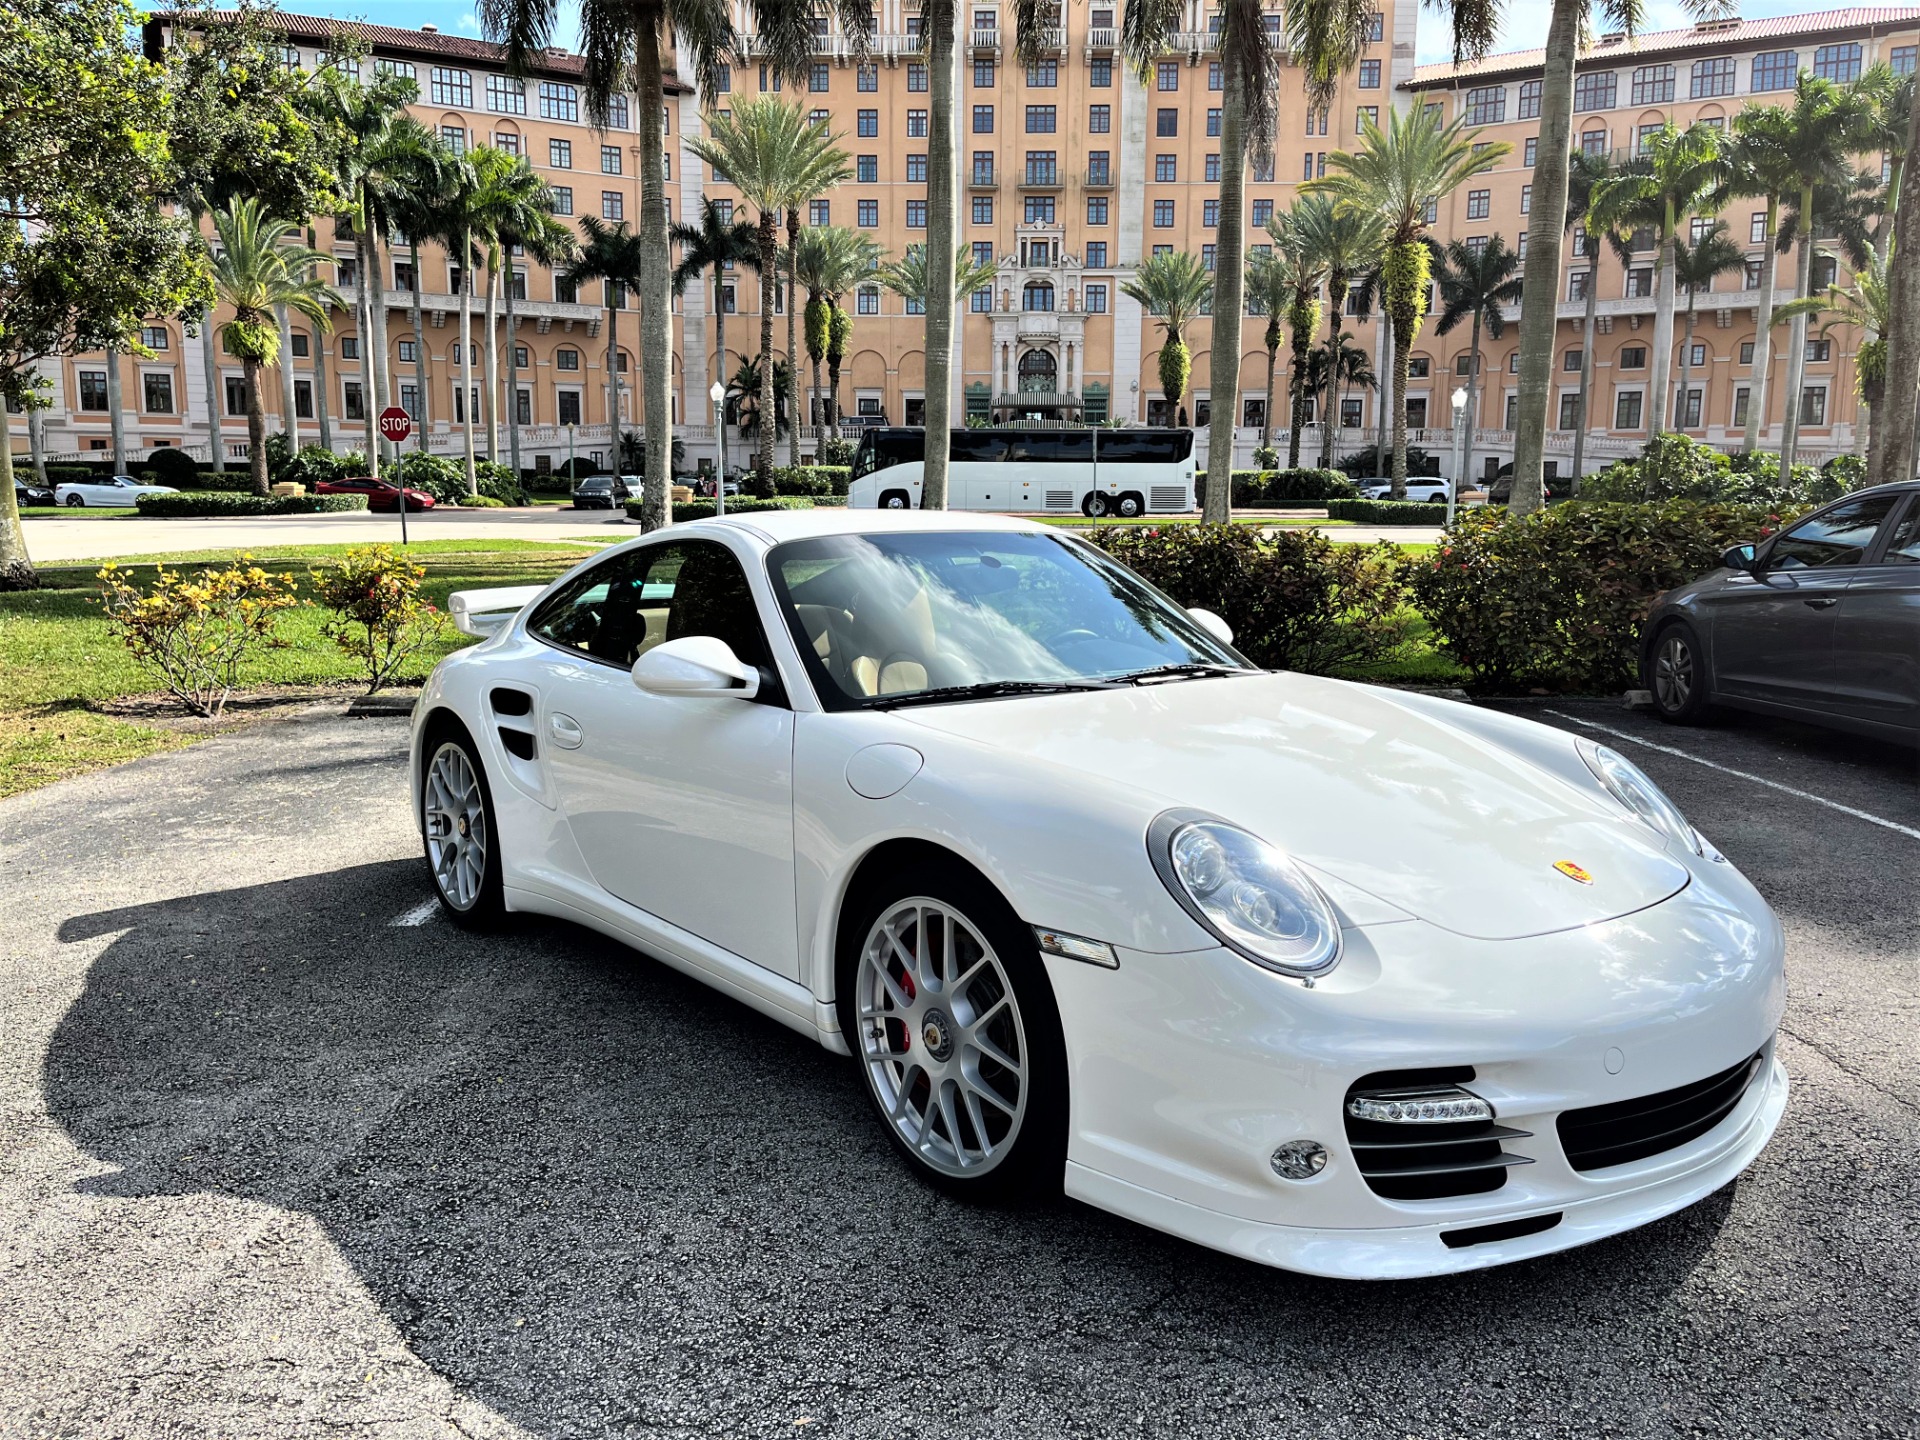 Used 2010 Porsche 911 Turbo for sale Sold at The Gables Sports Cars in Miami FL 33146 3